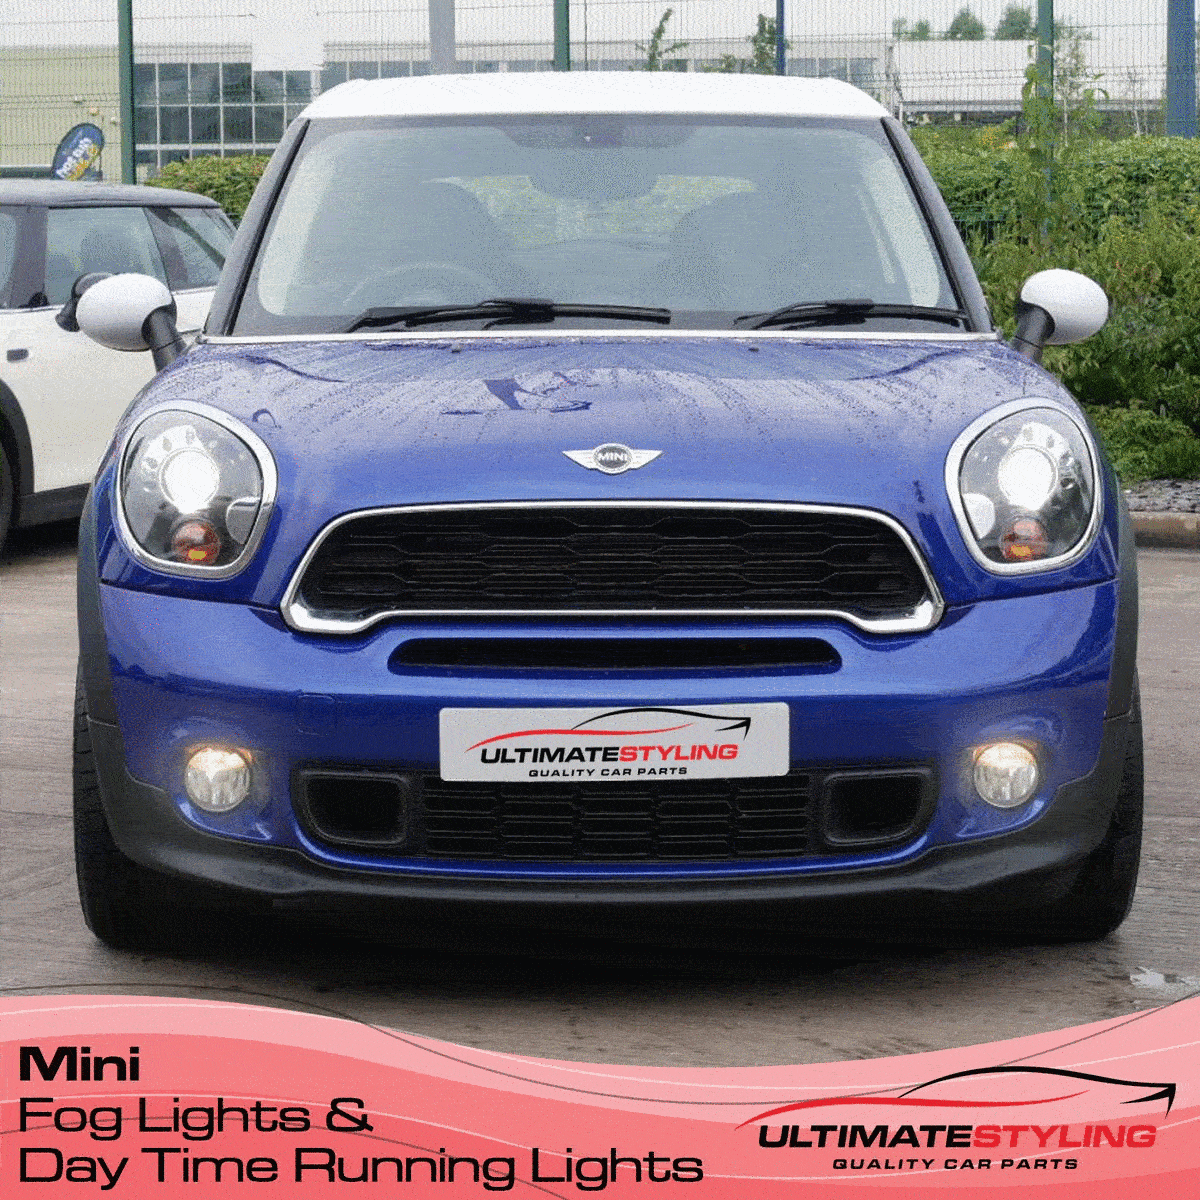 Mini replacement fog lights animation